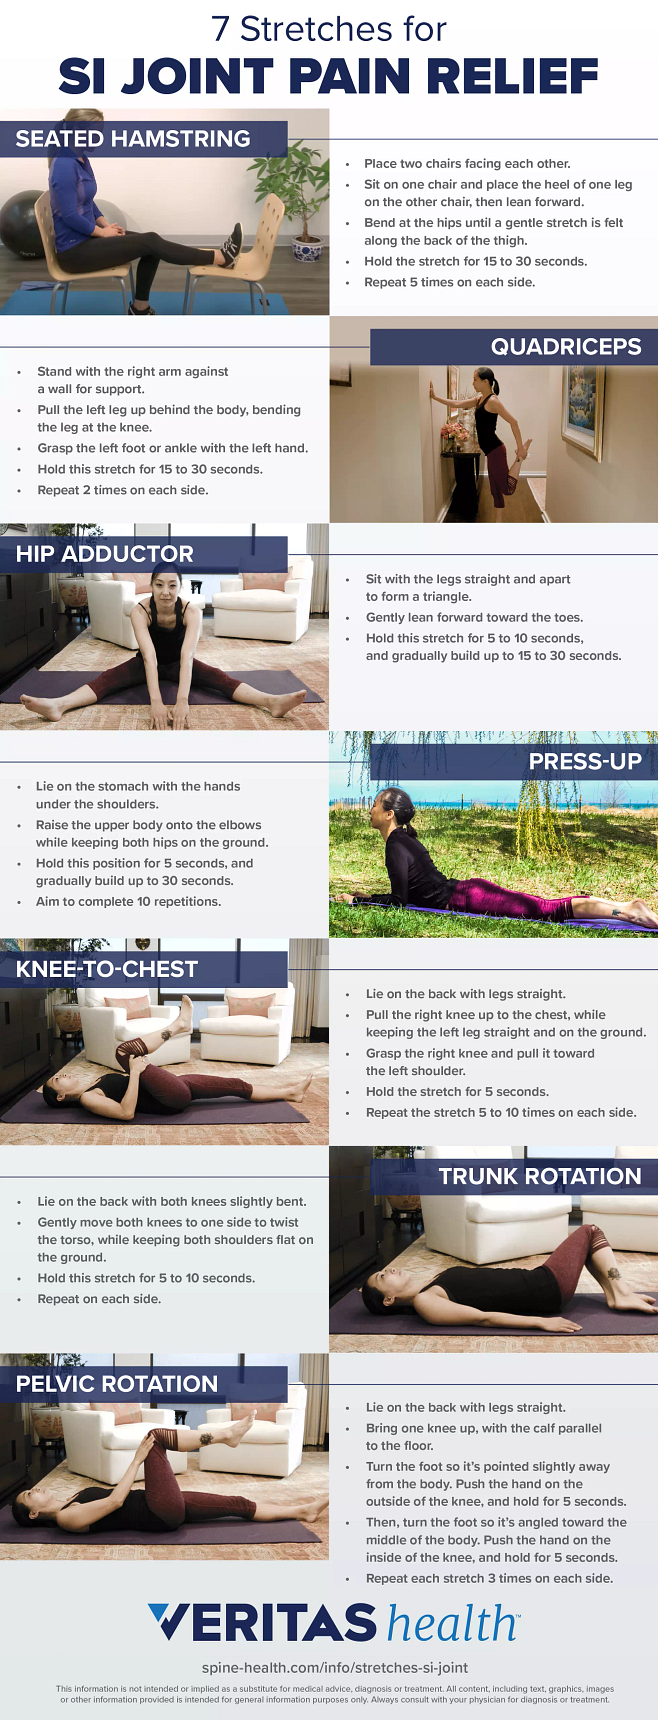 18 Stretches for Sciatica Pain Relief You Can Do at Home – Chirp™